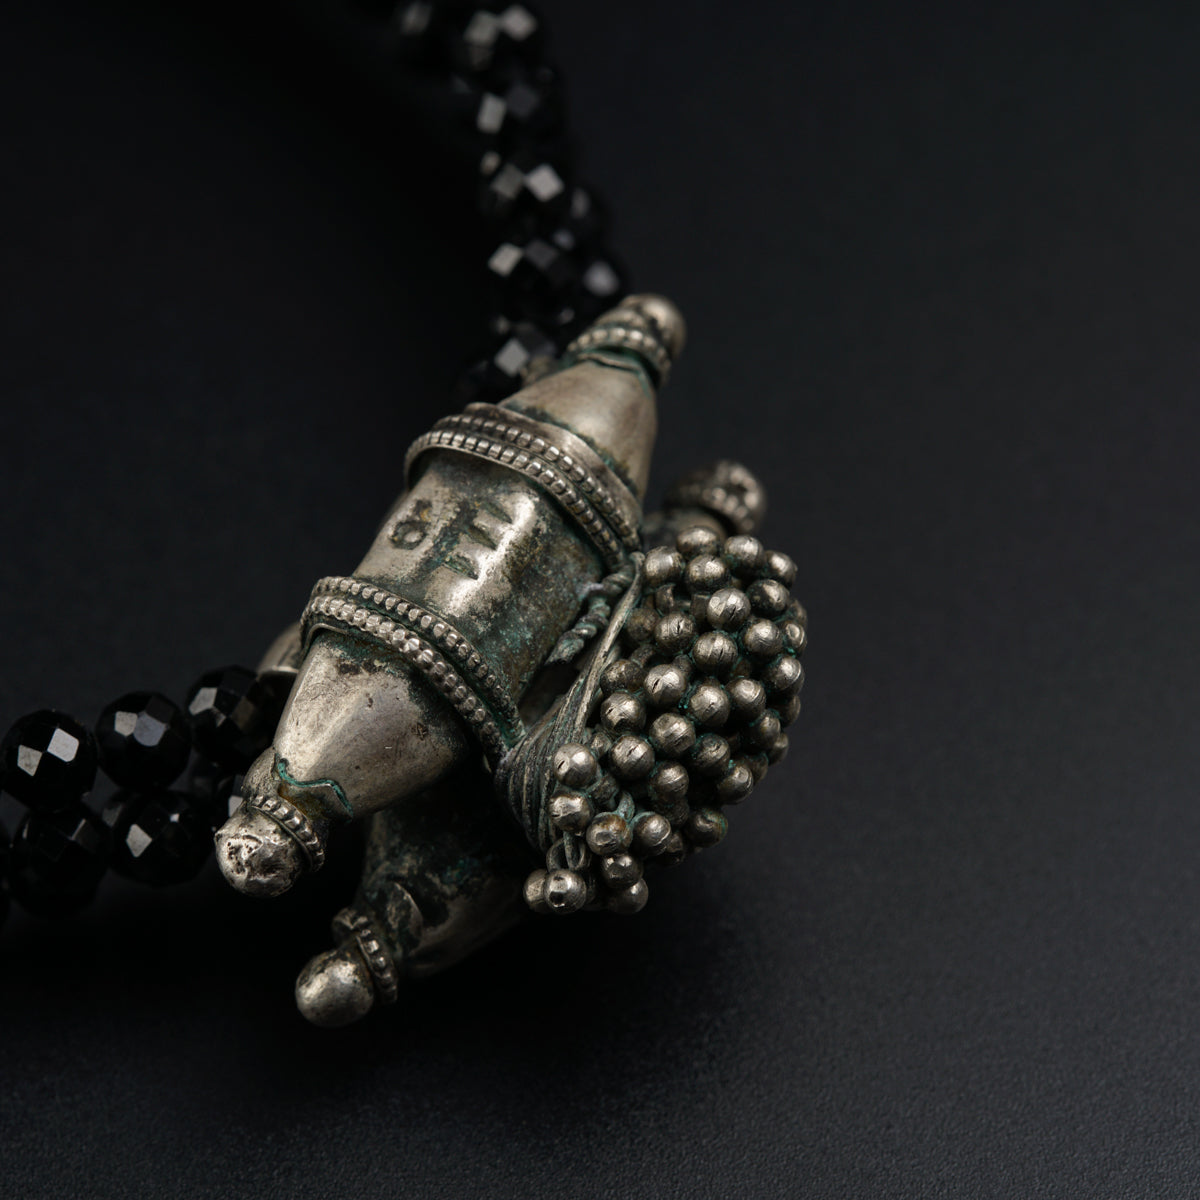 a black beaded necklace with a silver object on it